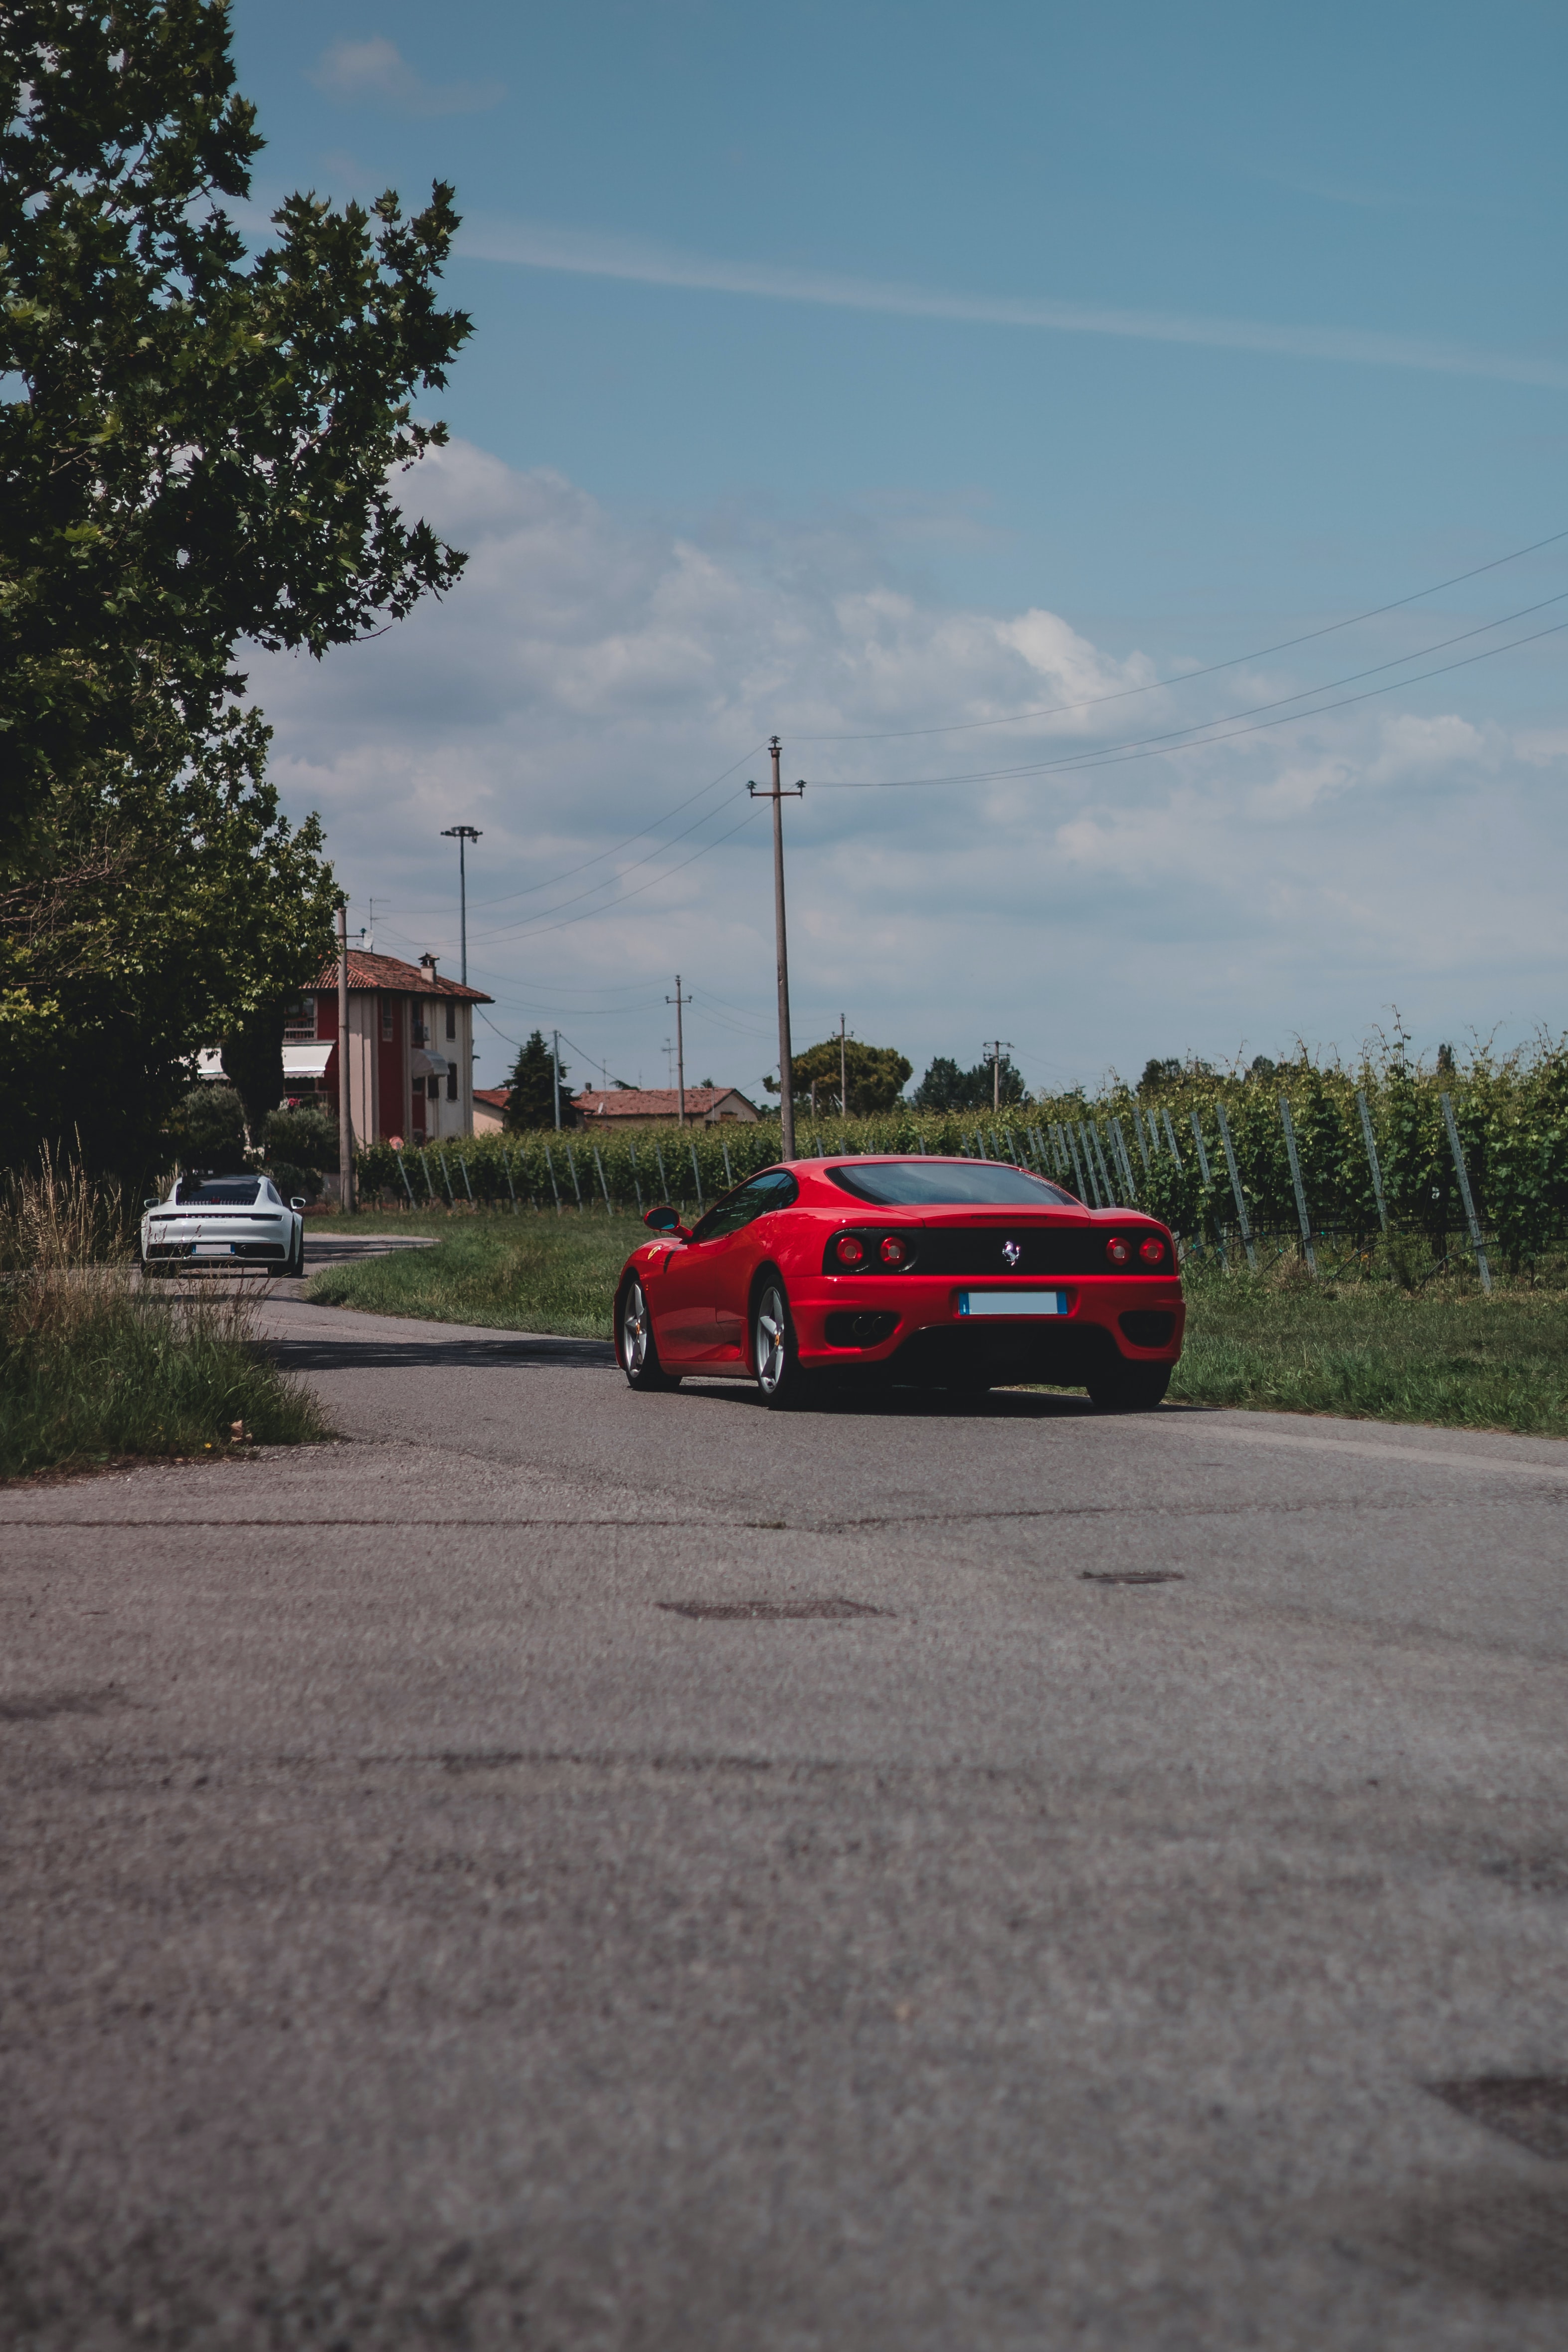 mustang, sports, cars, red, car, machine, sports car, back view, rear view Full HD